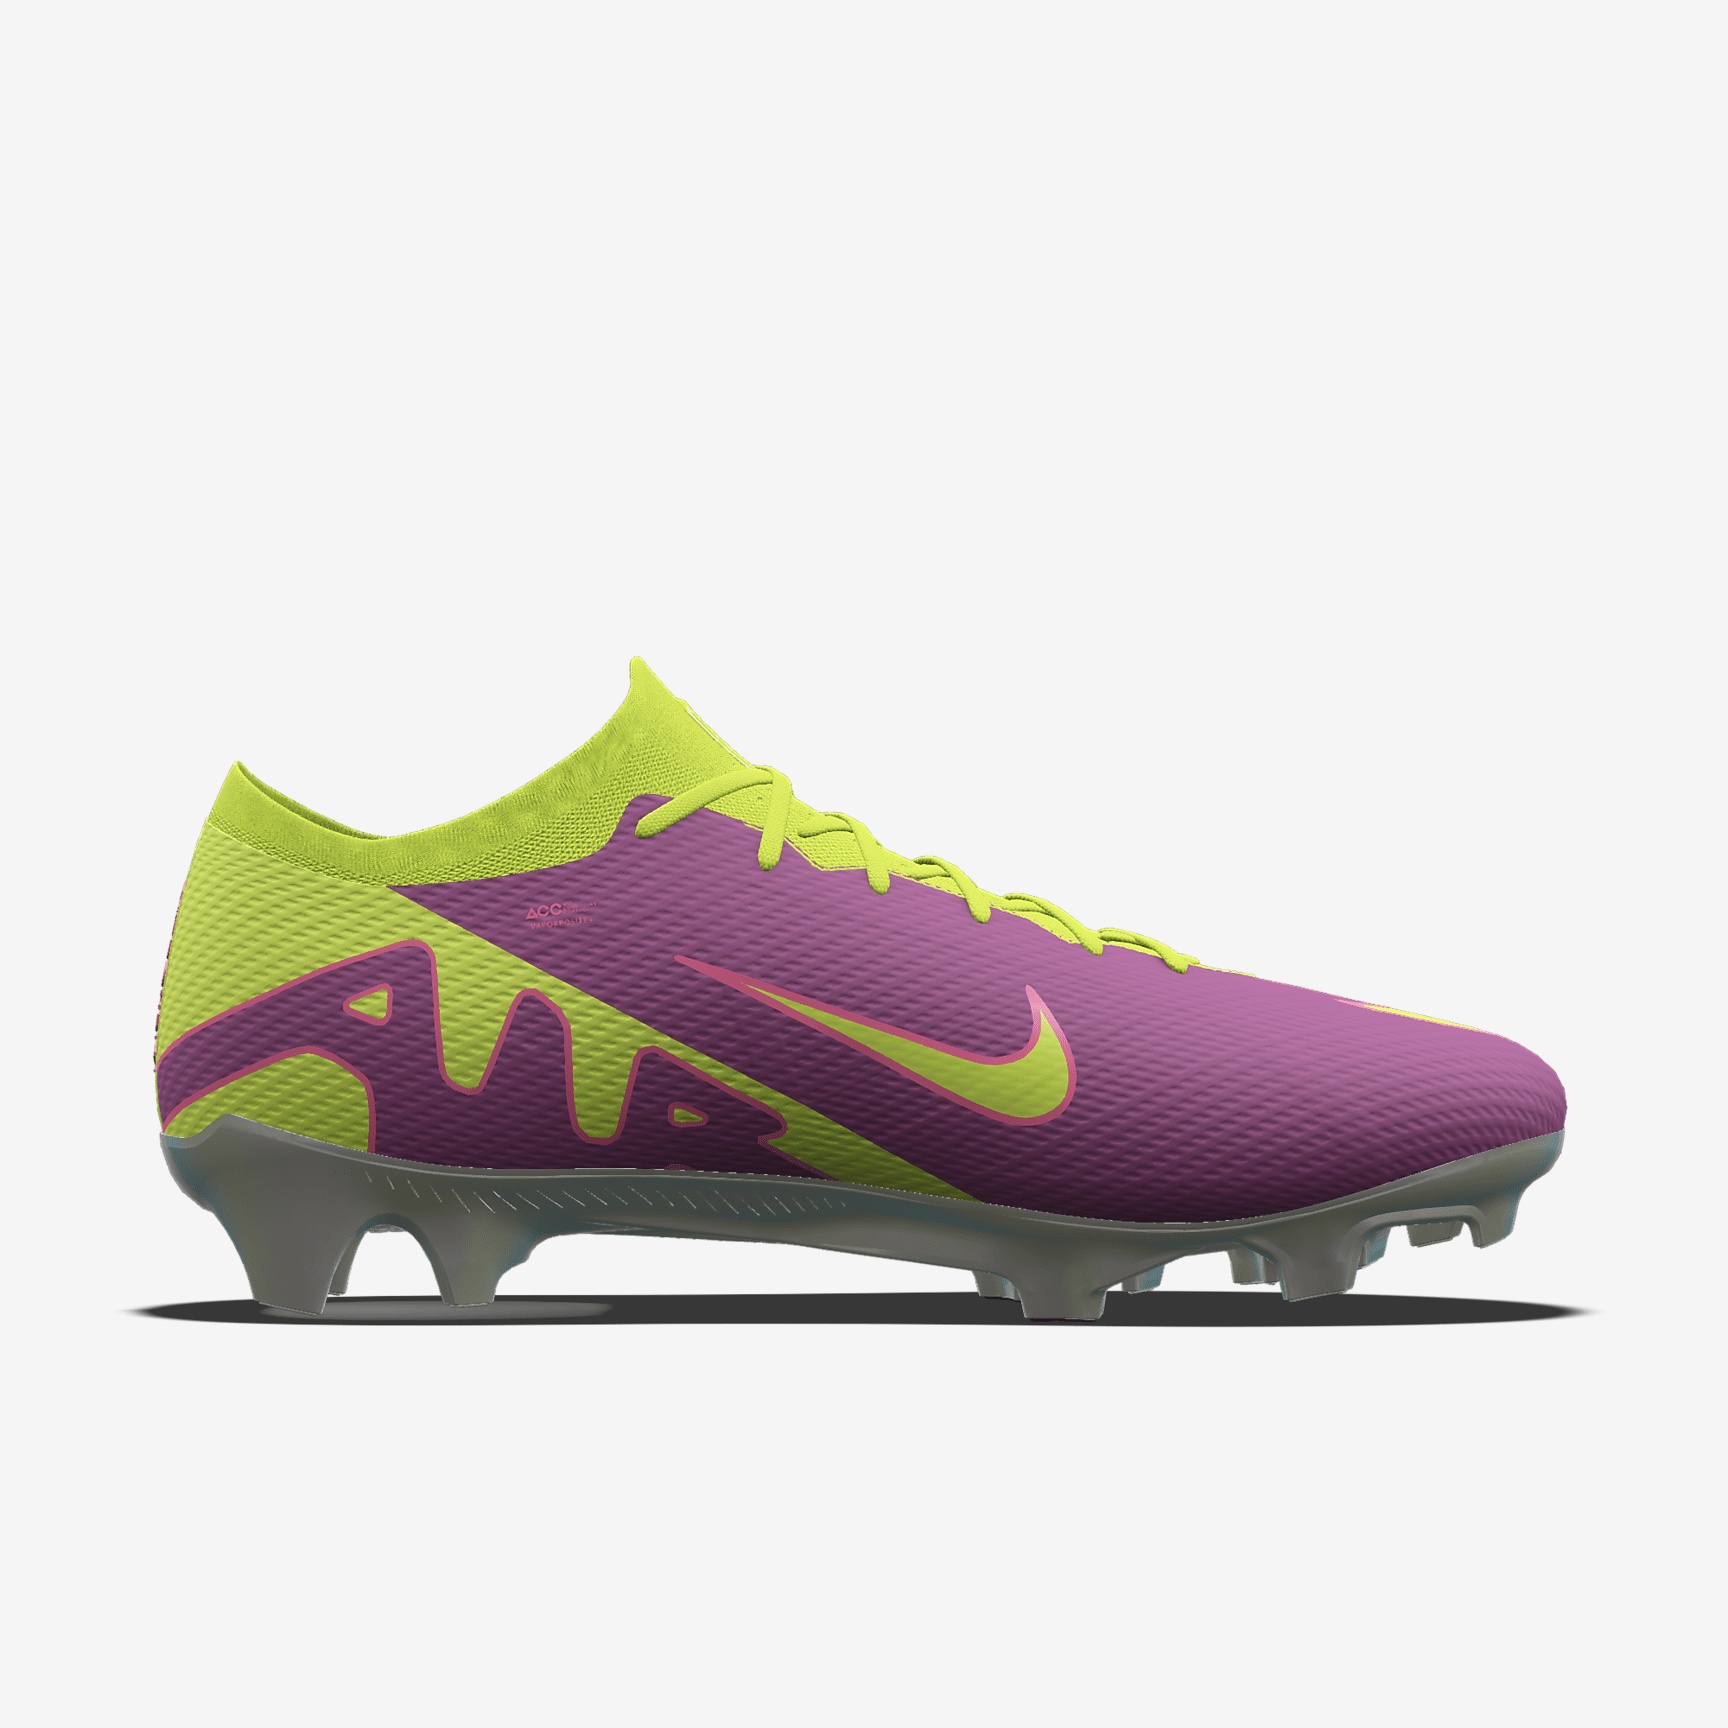 Nike Mercurial Vapor 15 Elite By You Custom Firm-Ground Soccer Cleats - 3